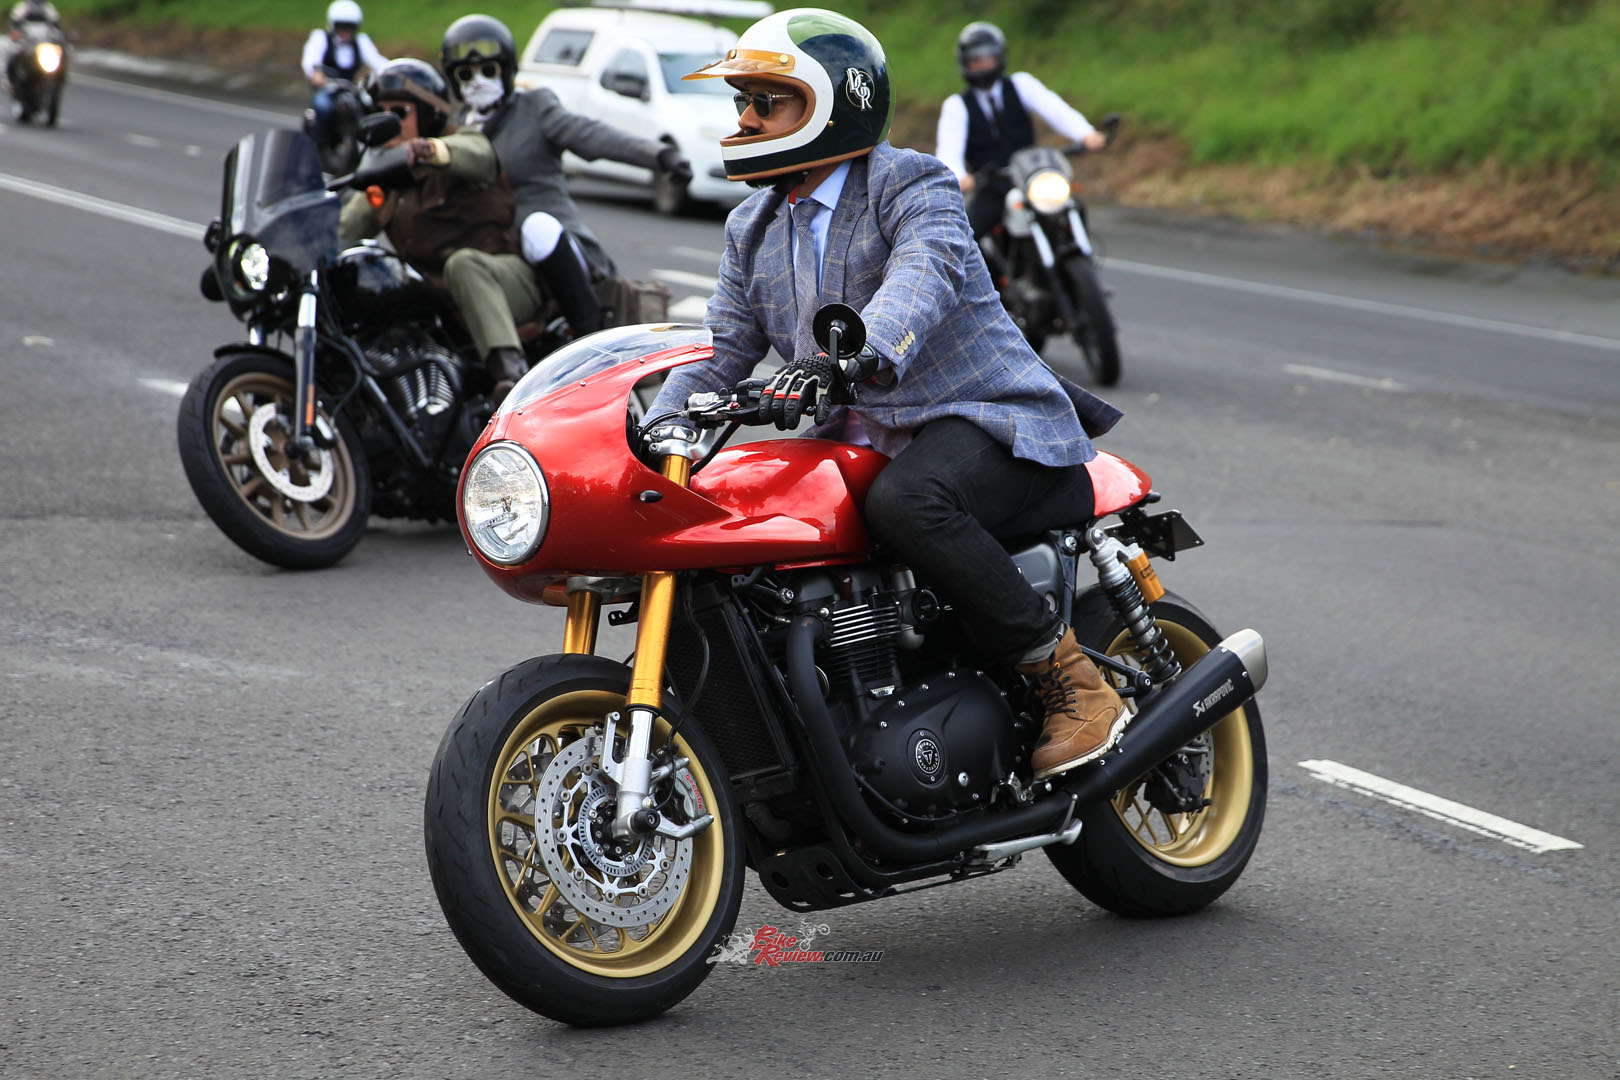 DGR creator and director, Mark Hawwa, joined us for the ride in Wollongong on-board his Triumph Thruxton.